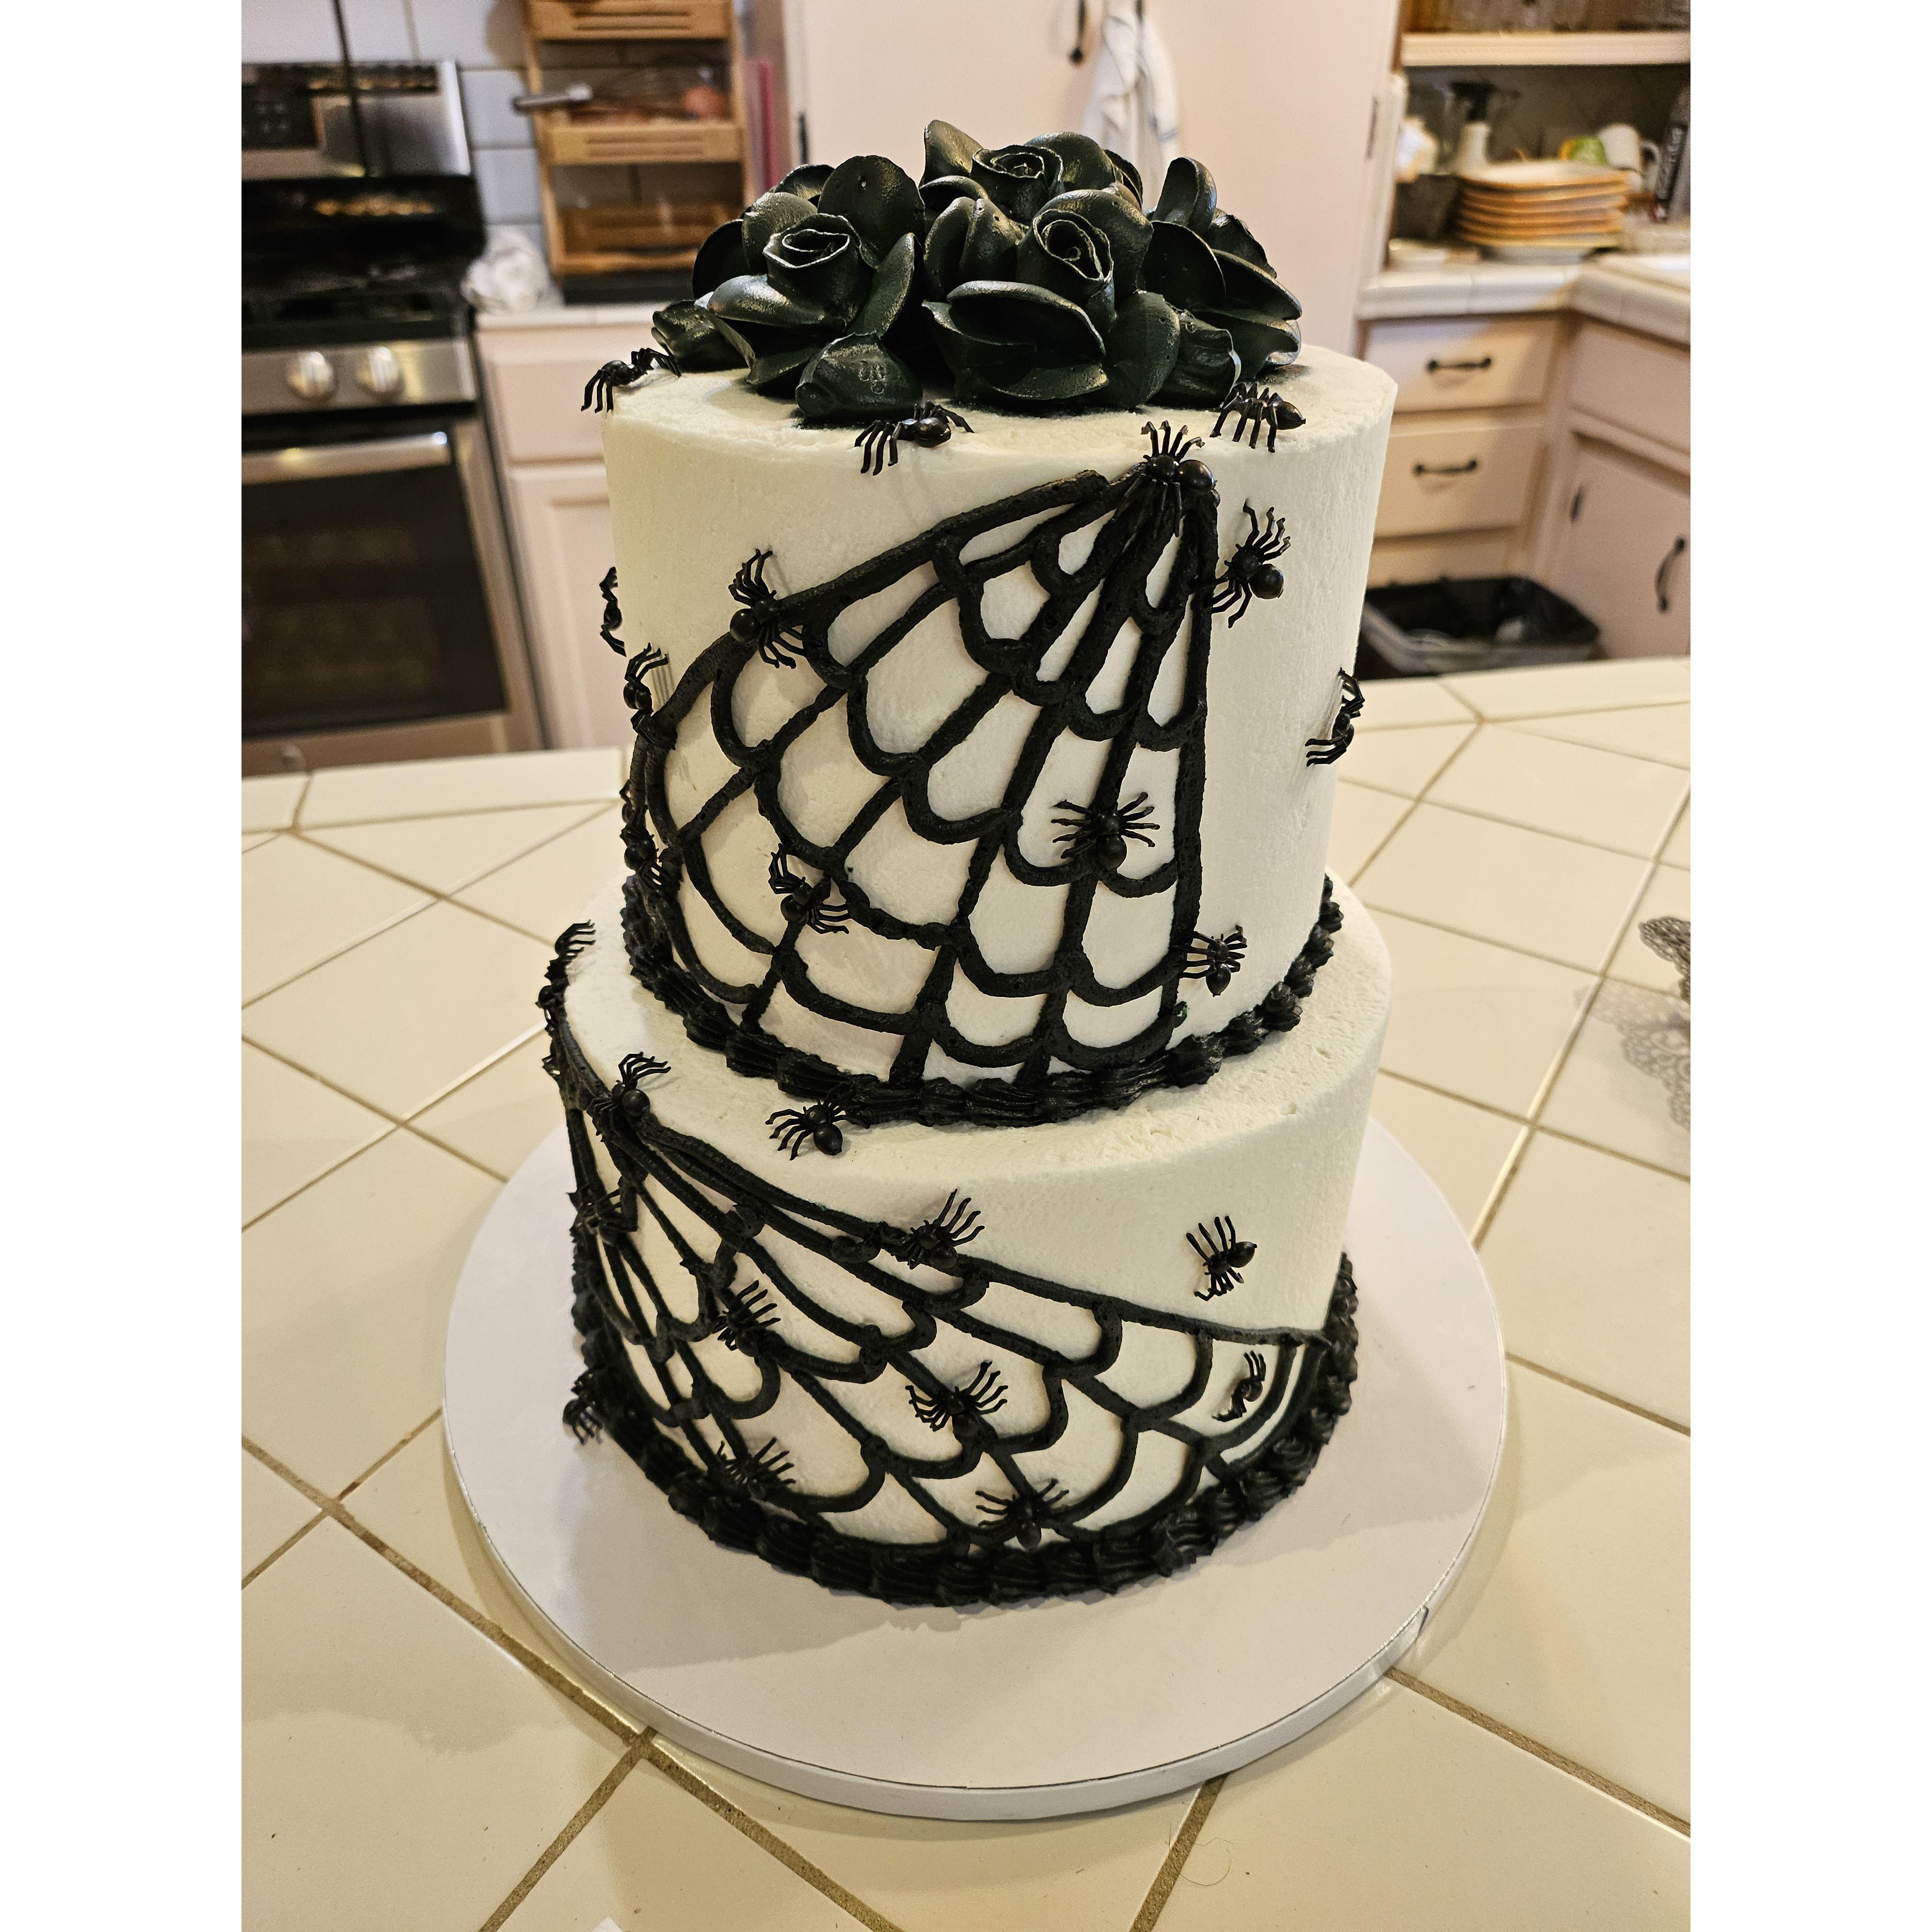 Our very spooky wedding shower cake from Feb 11th! Credit to Sunrise Bakery in Turlock!